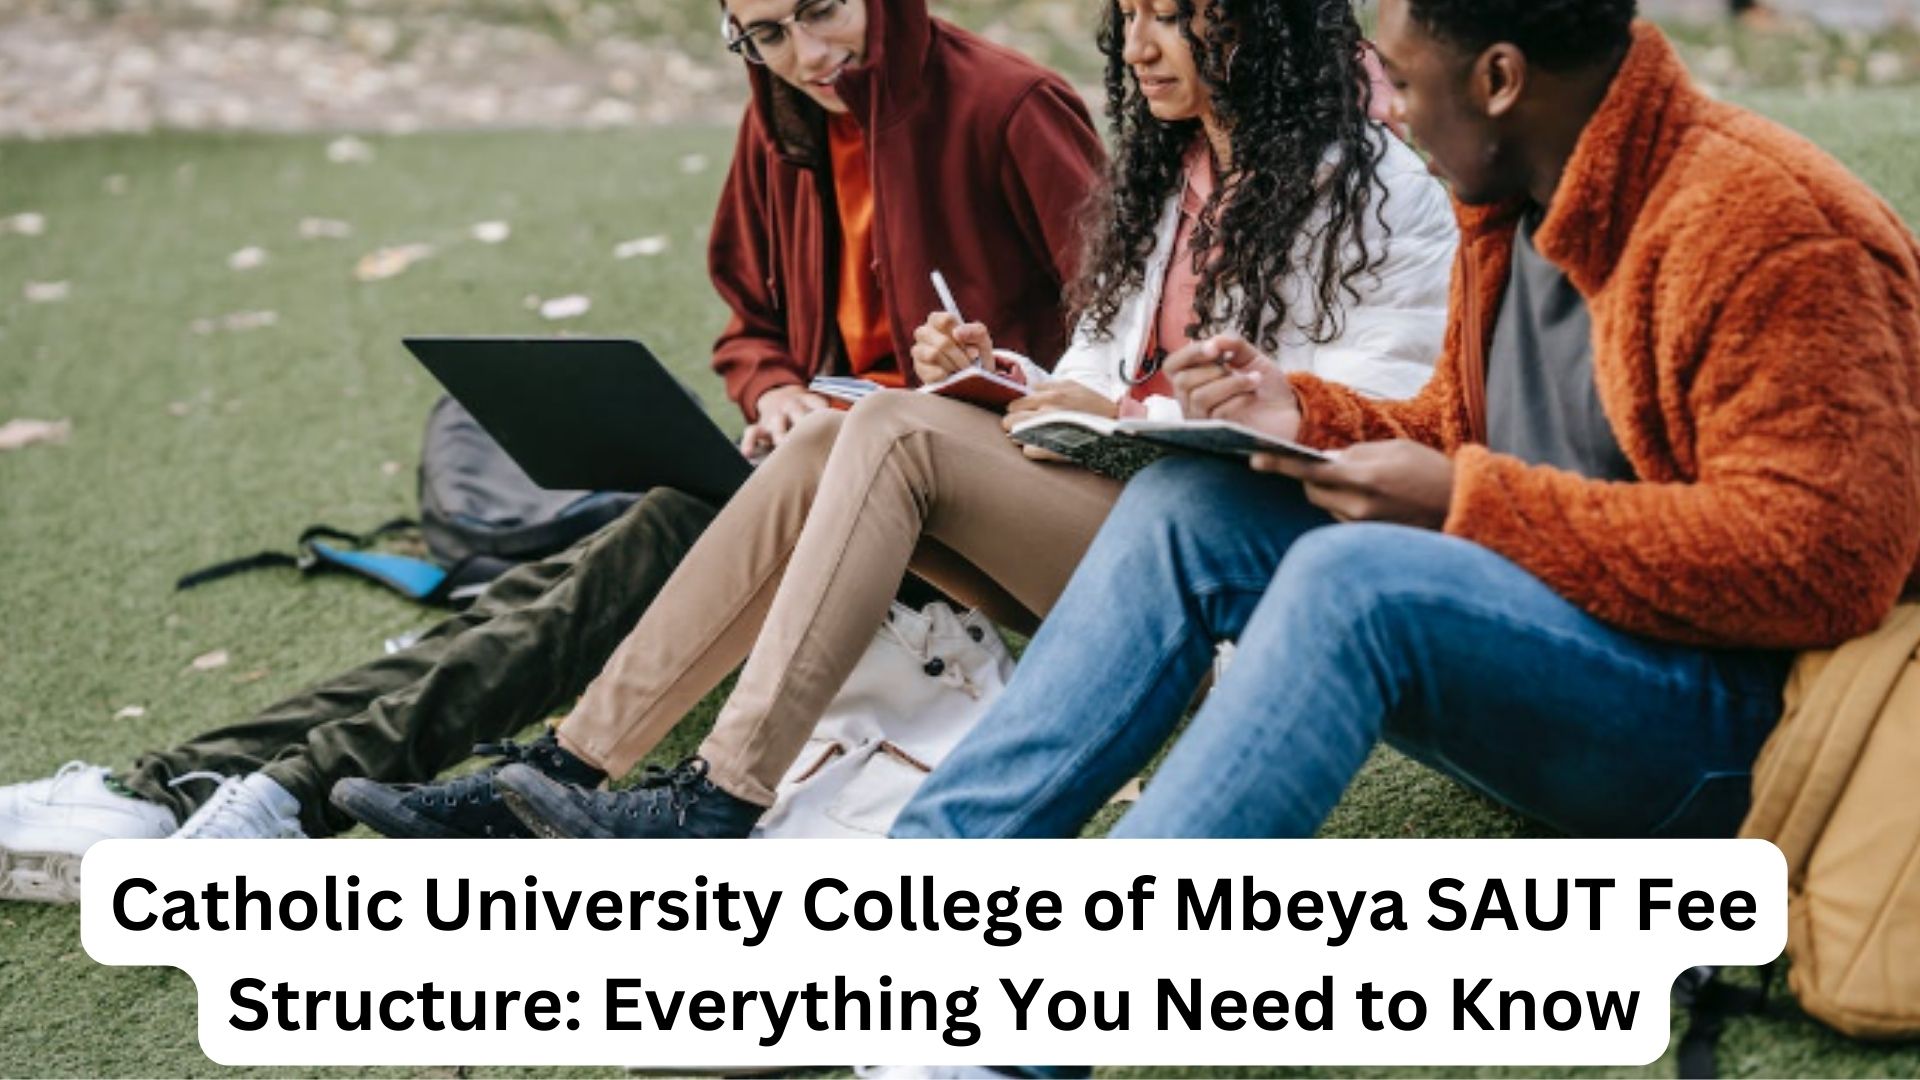 Catholic University College of Mbeya SAUT Fee Structure: Everything You Need to Know